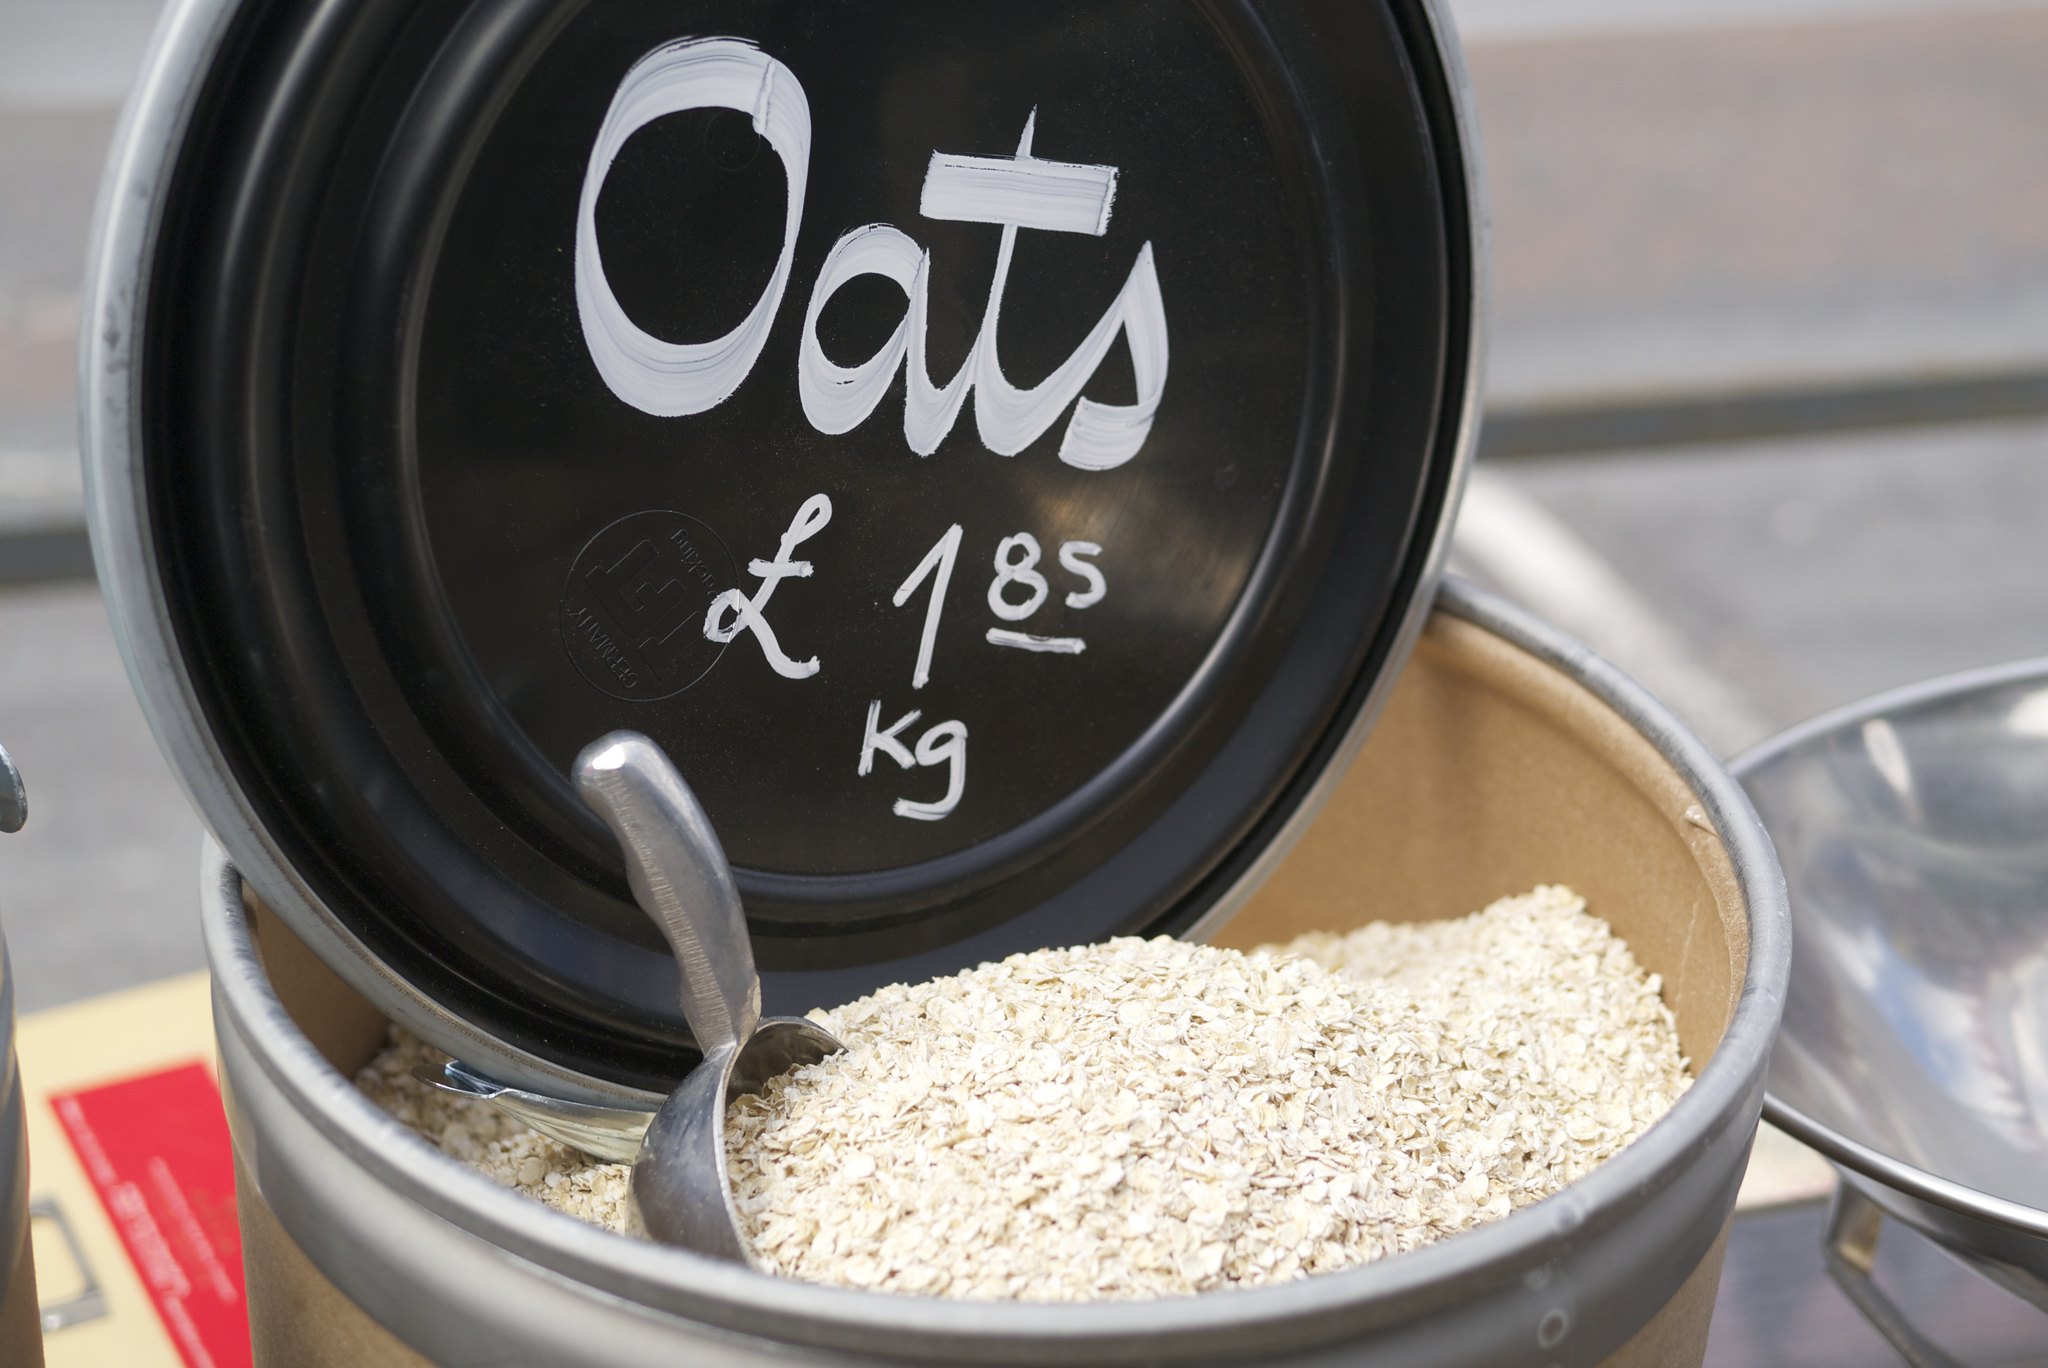 A photo of rolled oats sold in bulk for £1.85 per kilogram